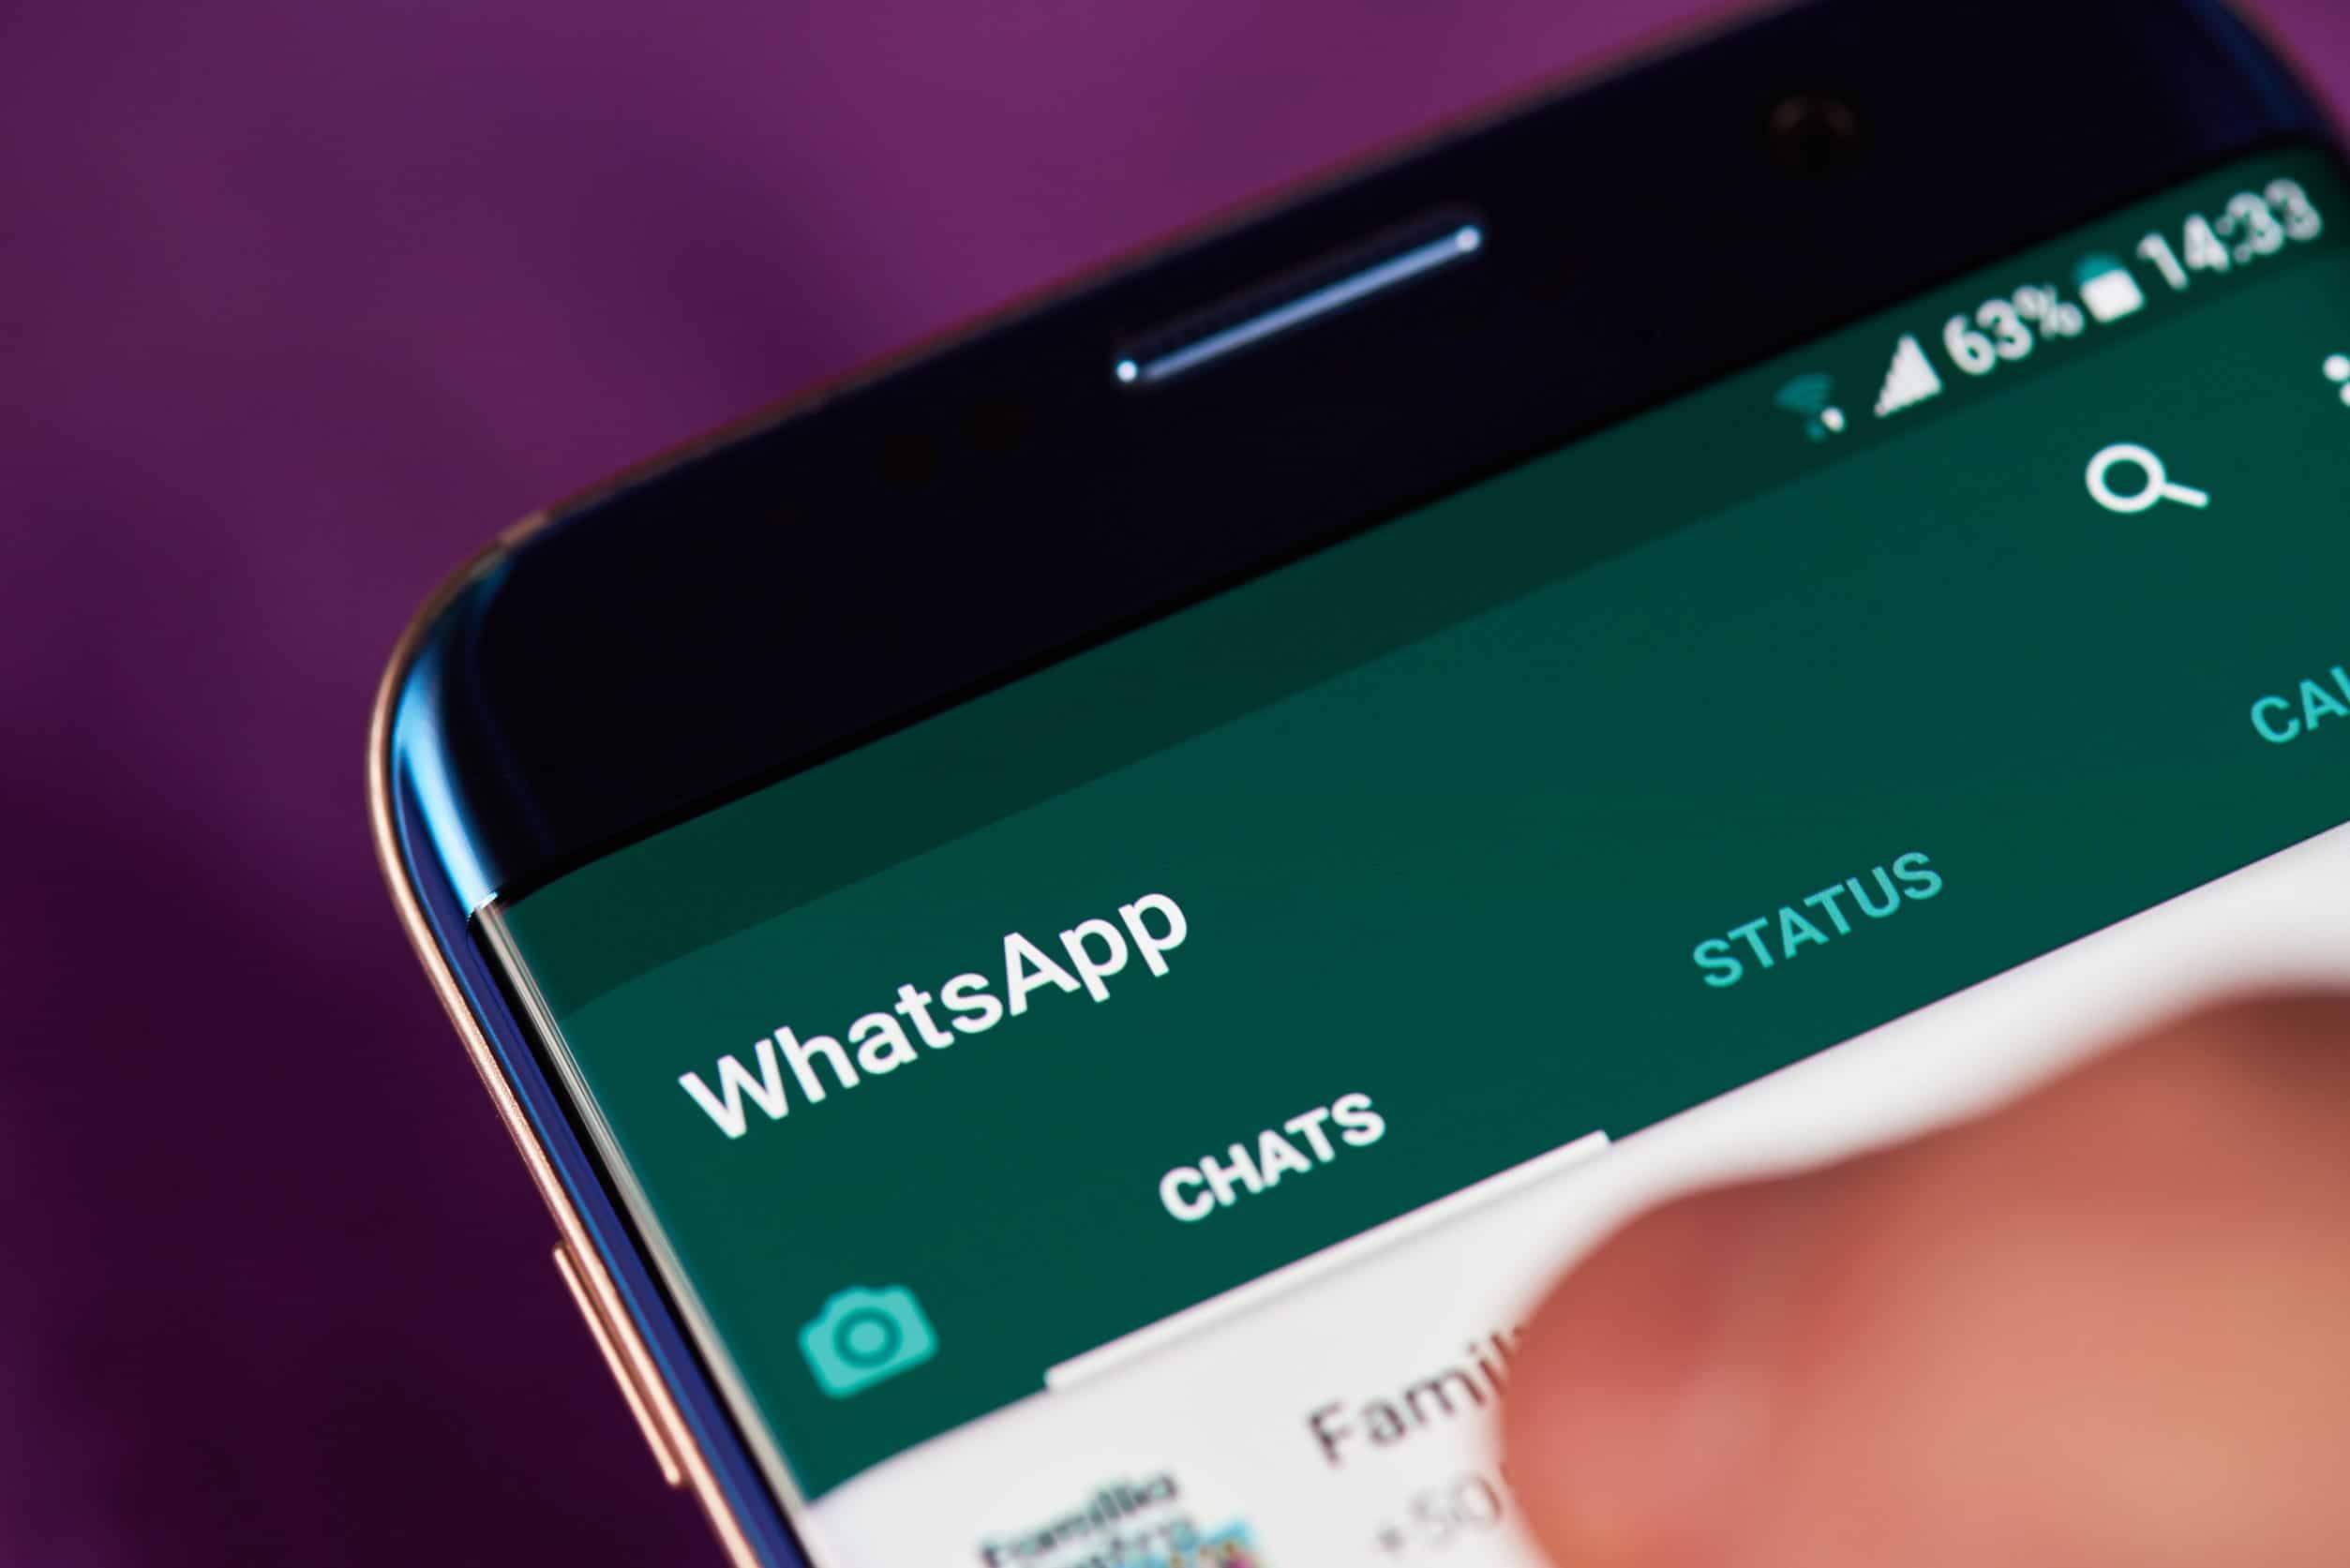 10 super practical functions to discover on WhatsApp